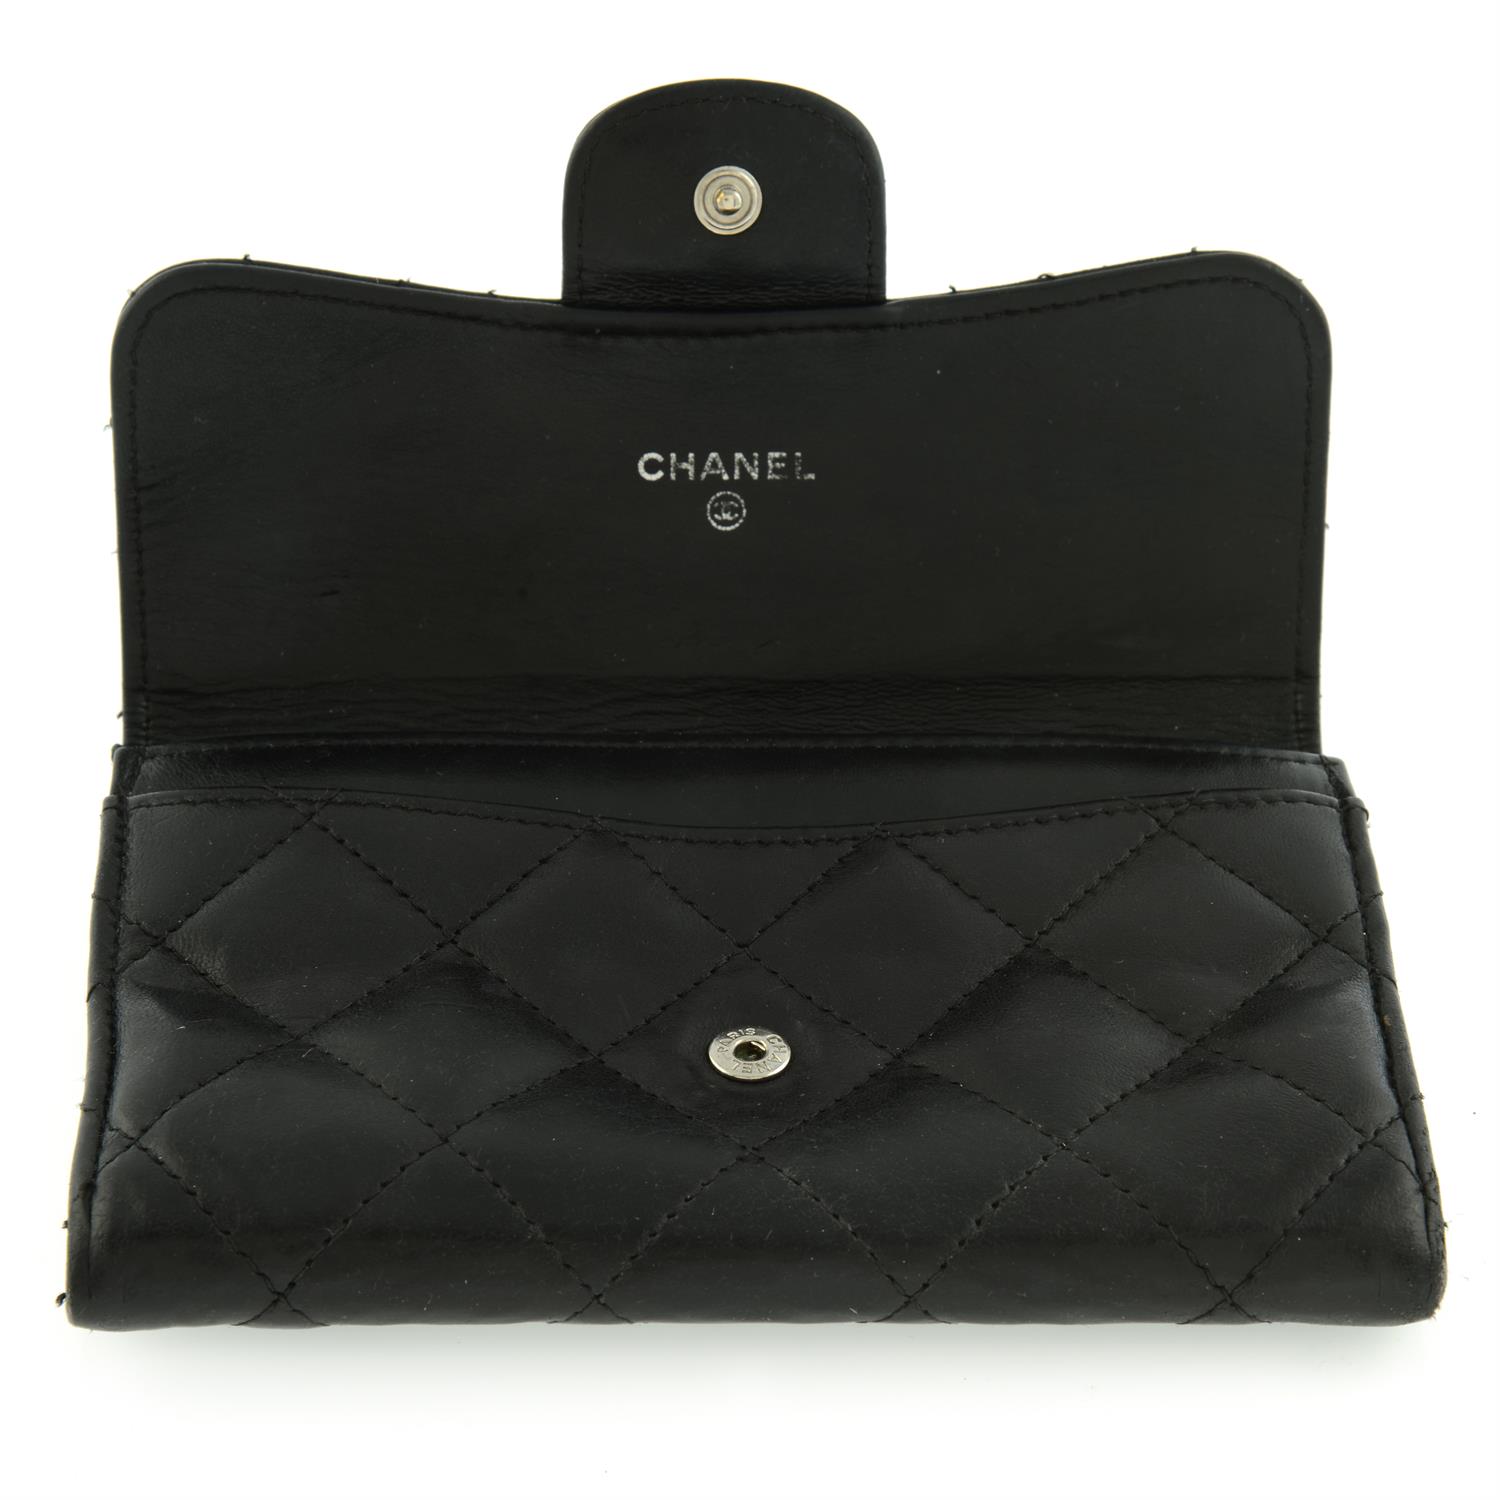 Chanel - CC quilted Flap wallet. - Image 3 of 3